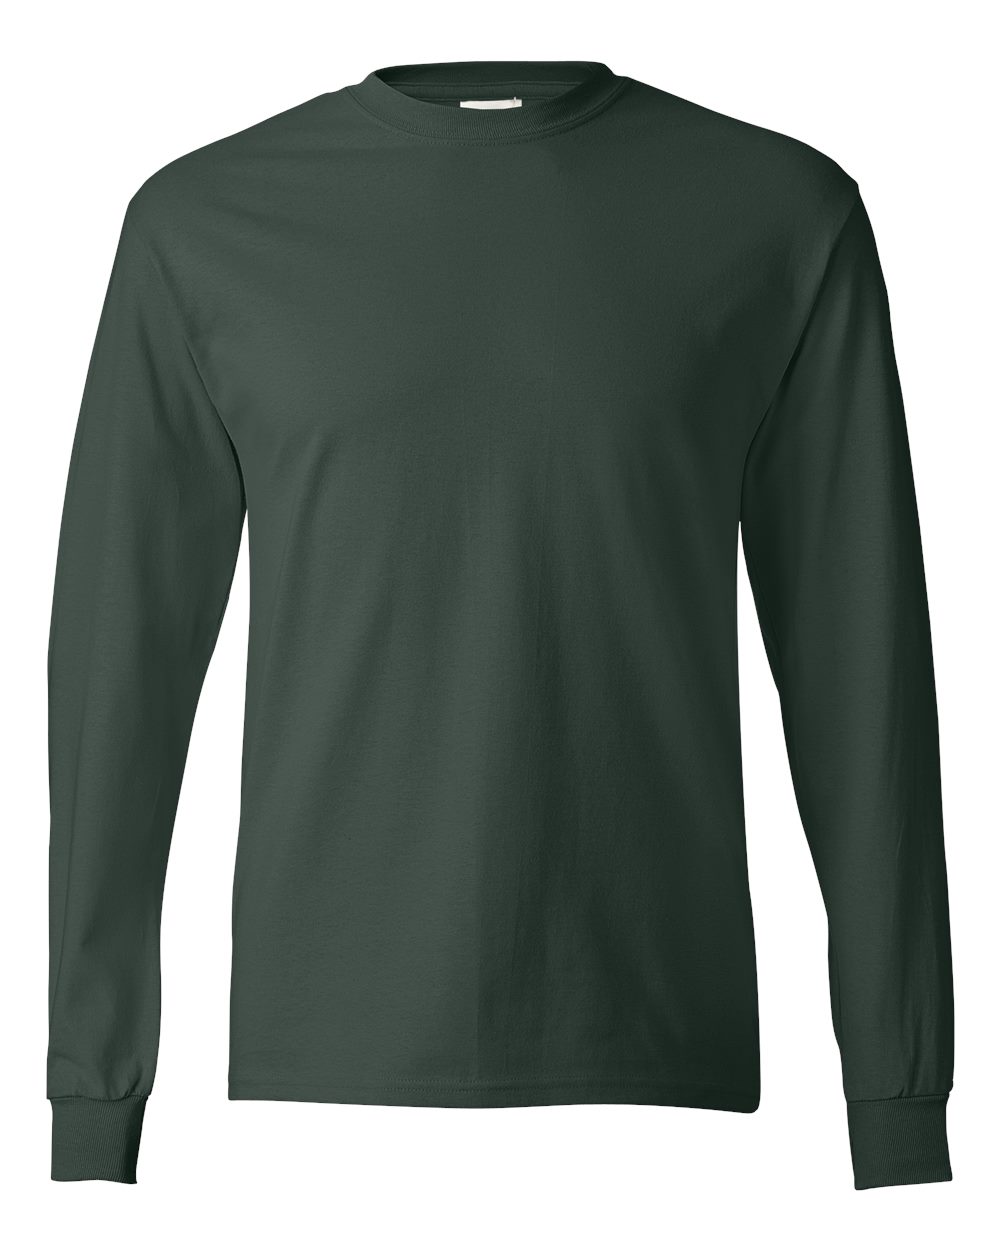 Hanes Mens Blank Cotton Solid Long Sleeve T Shirt 5586 up to 3XL | eBay